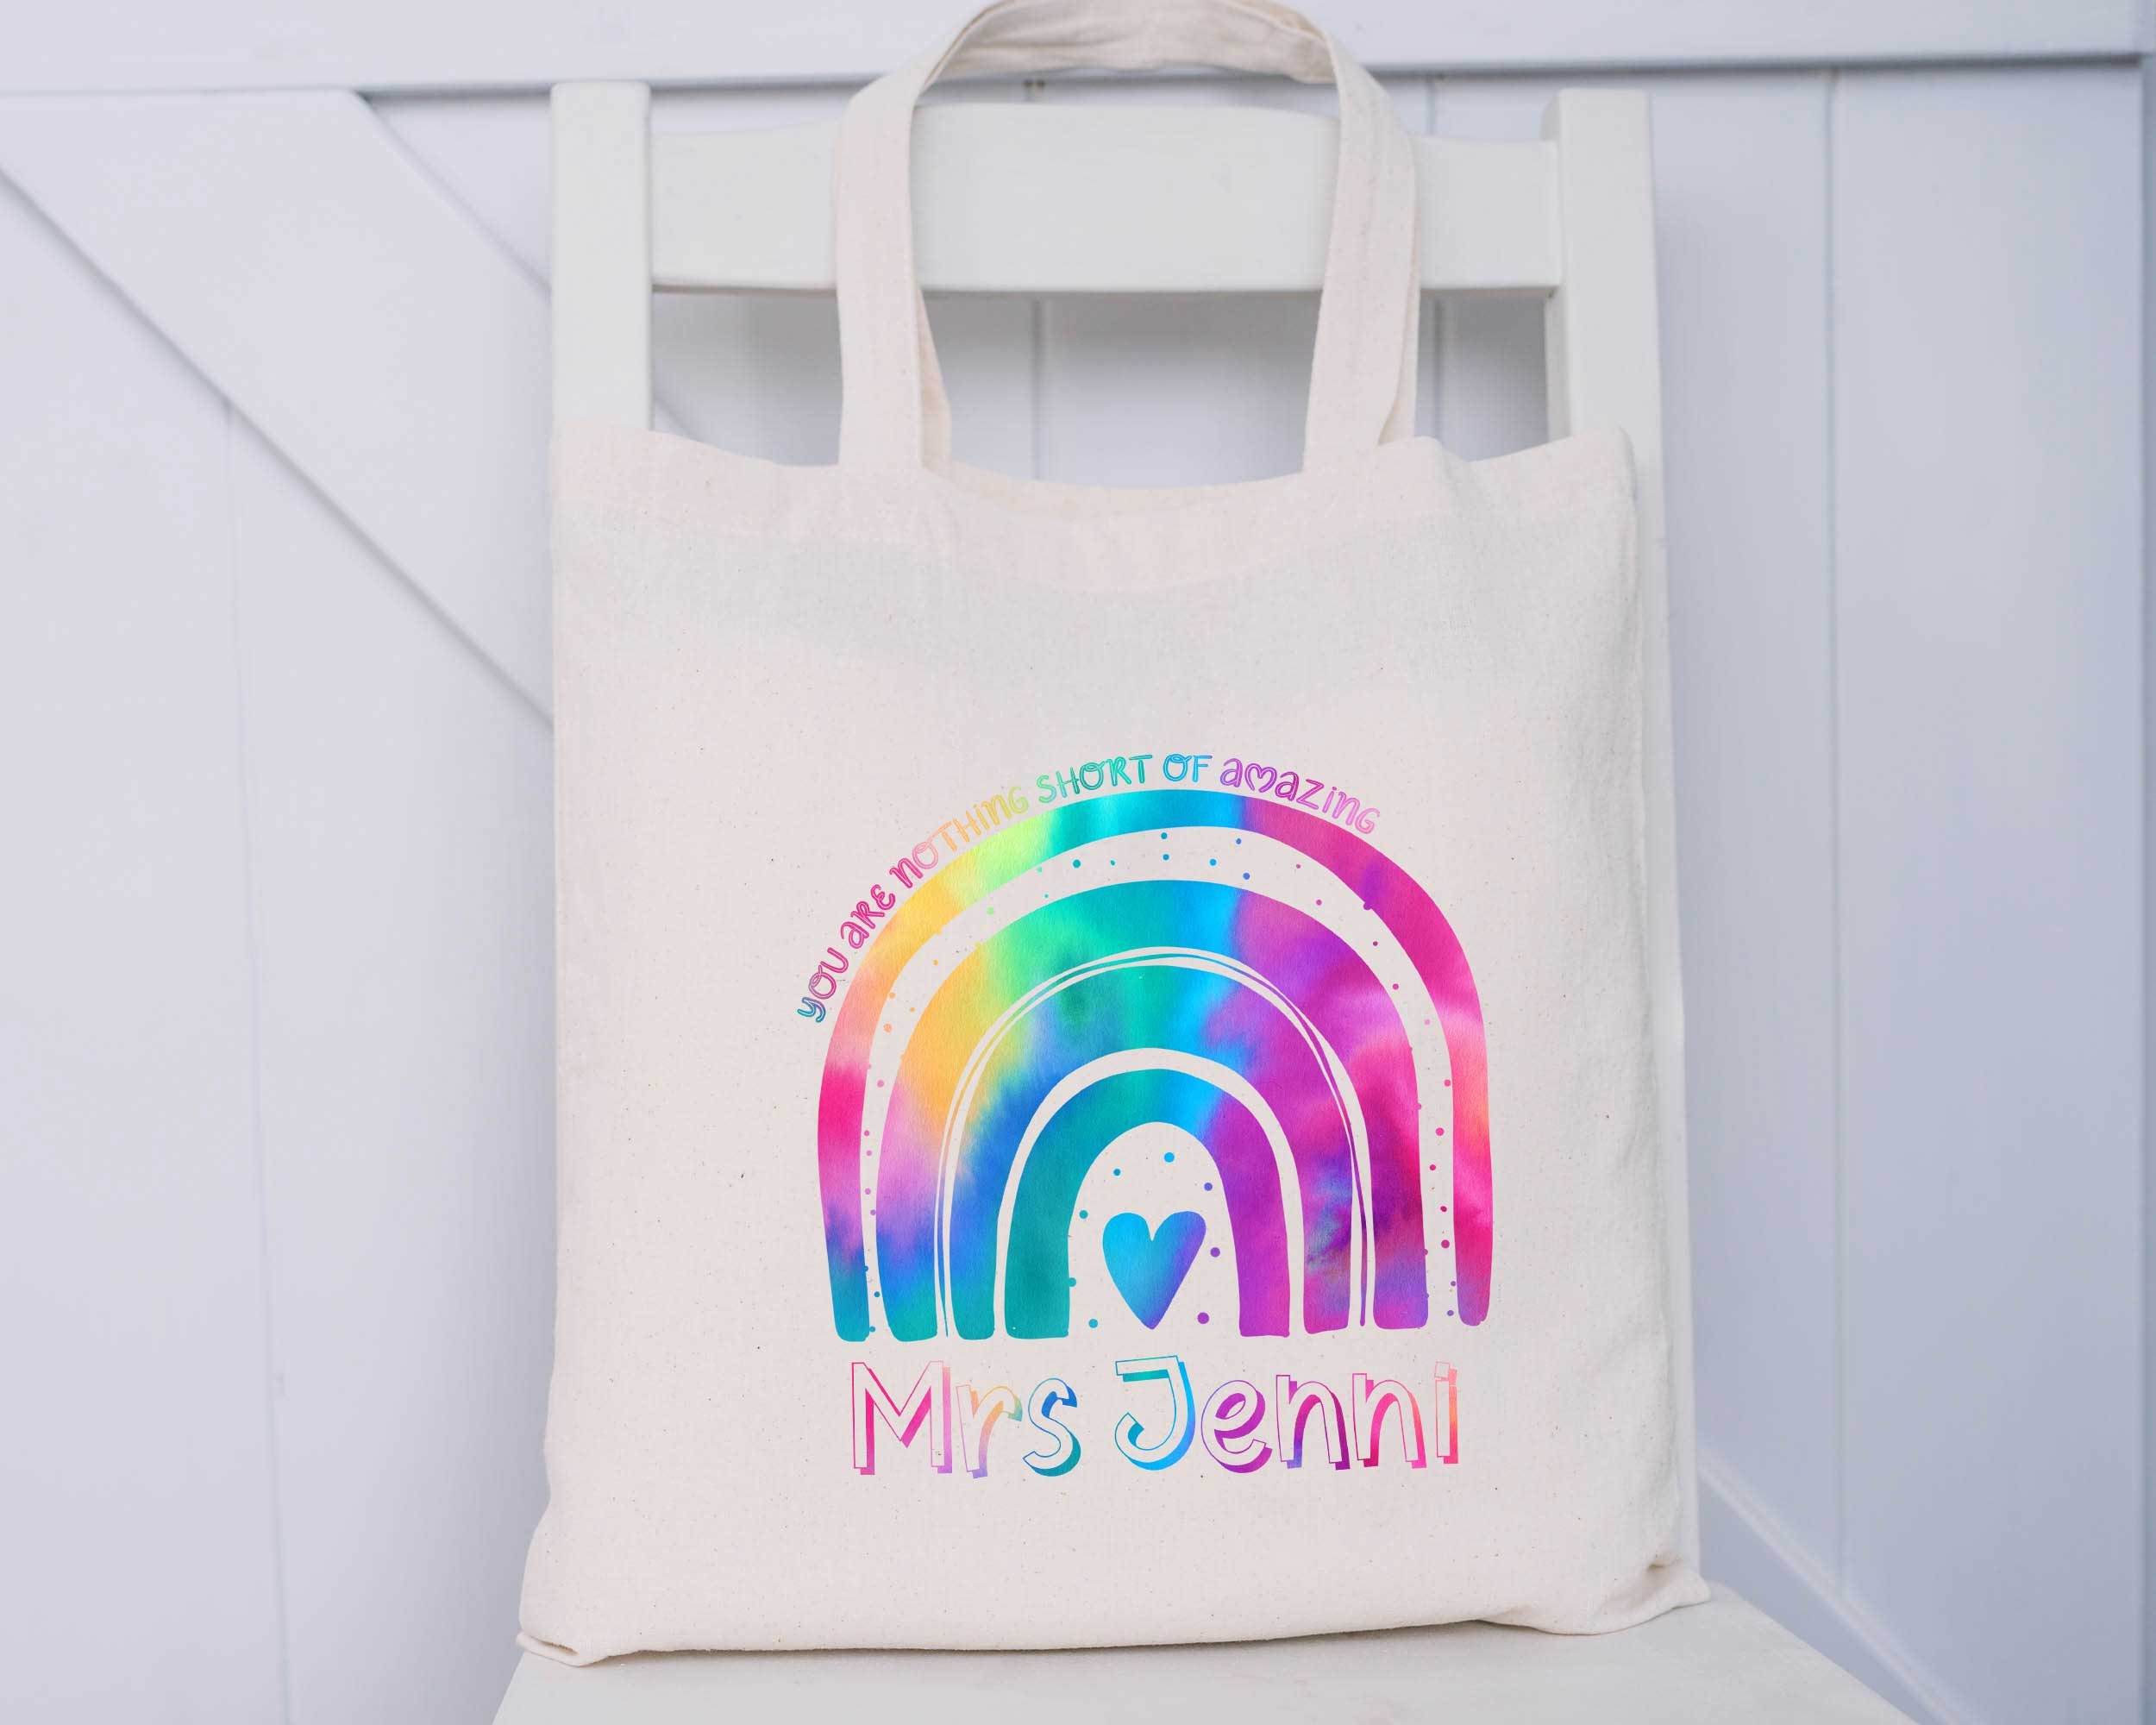 A Person Holding a Rainbow Tote Bag · Free Stock Photo